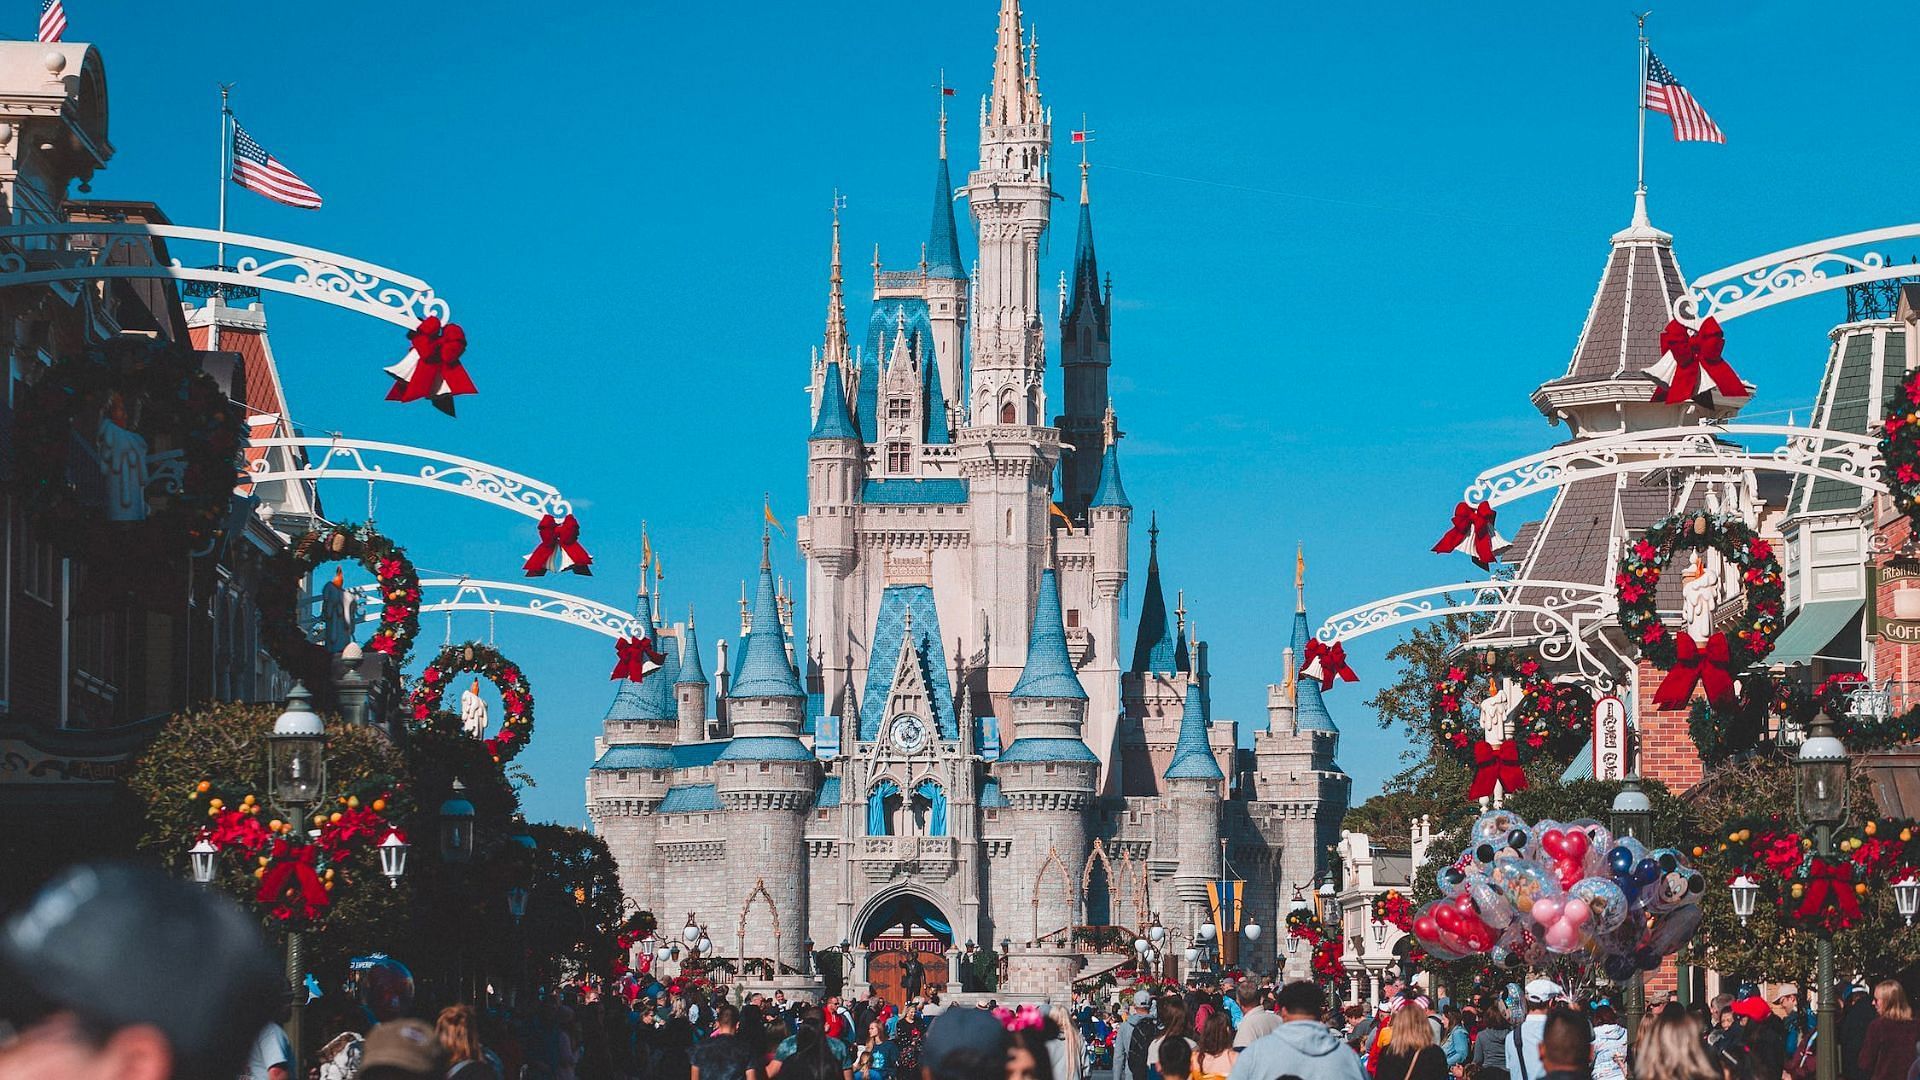 The newest offerings at Walt Disney World include slightly higher ticket prices (Image via Craig Adderley on Pexels)